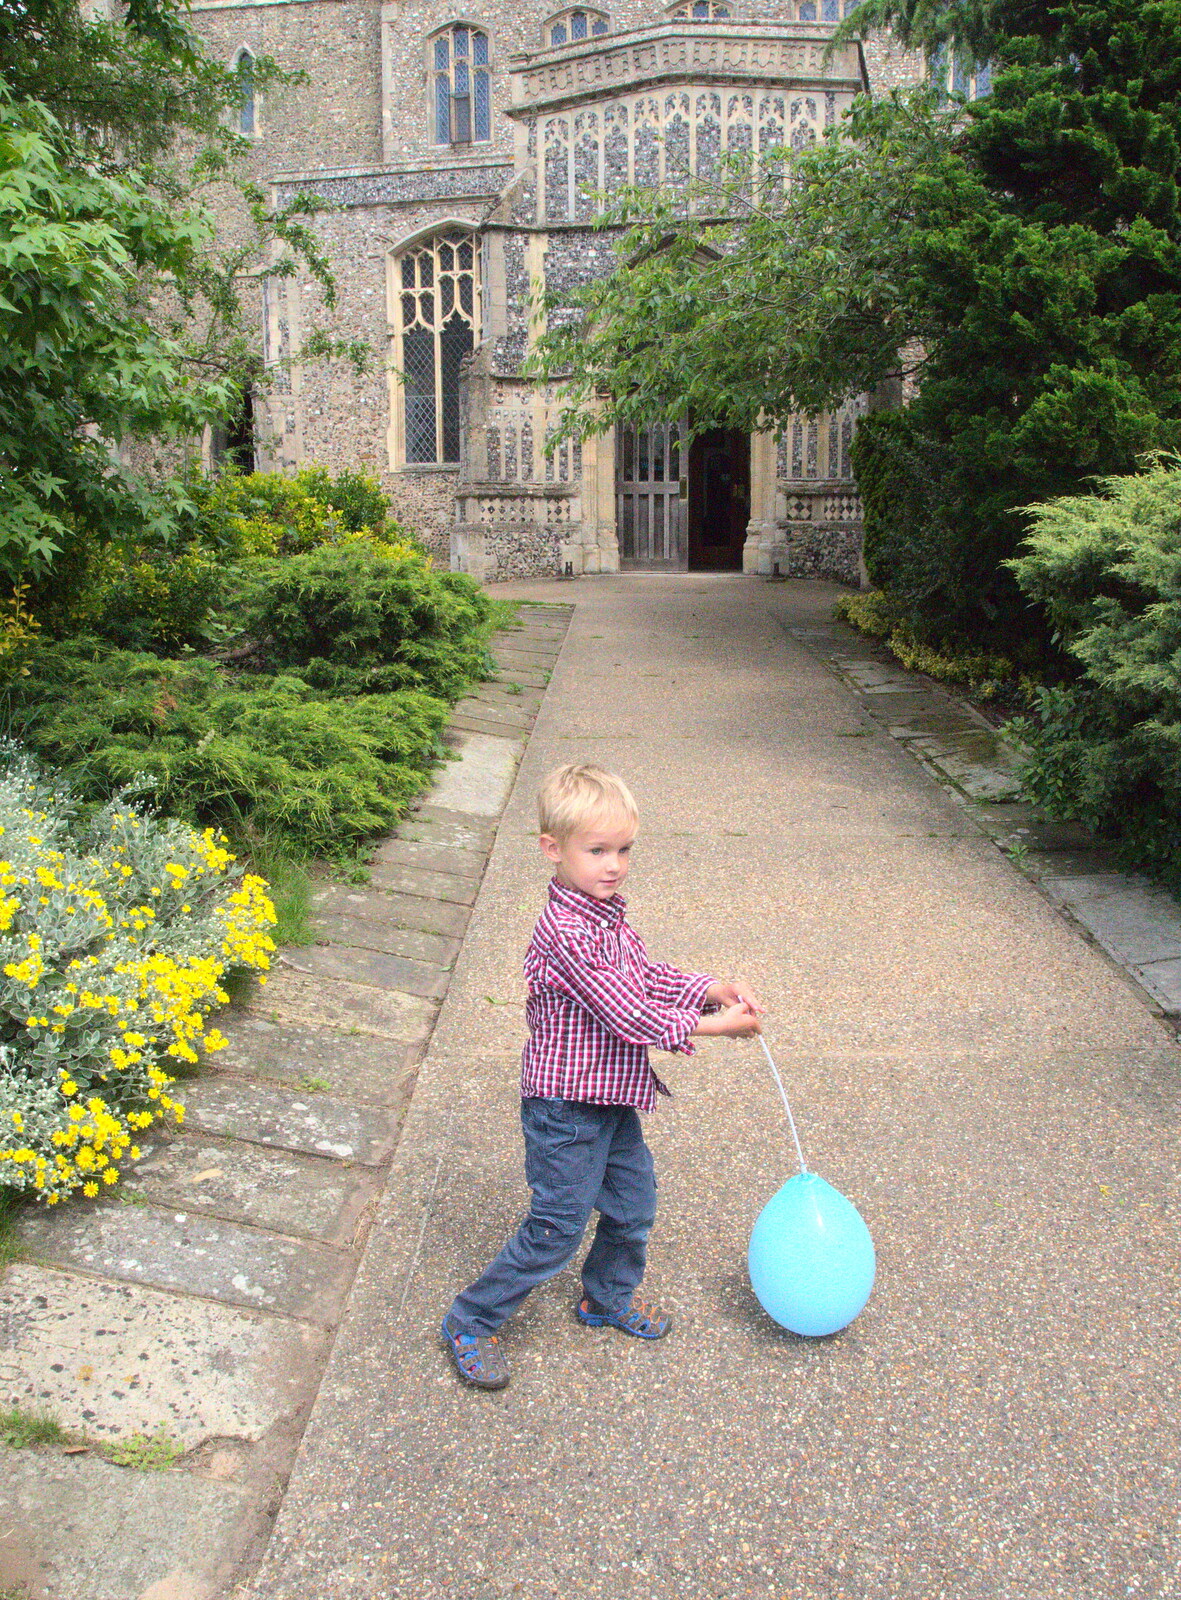 Harry and his balloon outside the church from A Trip to Norwich and Diss Markets, Norfolk - 25th June 2016